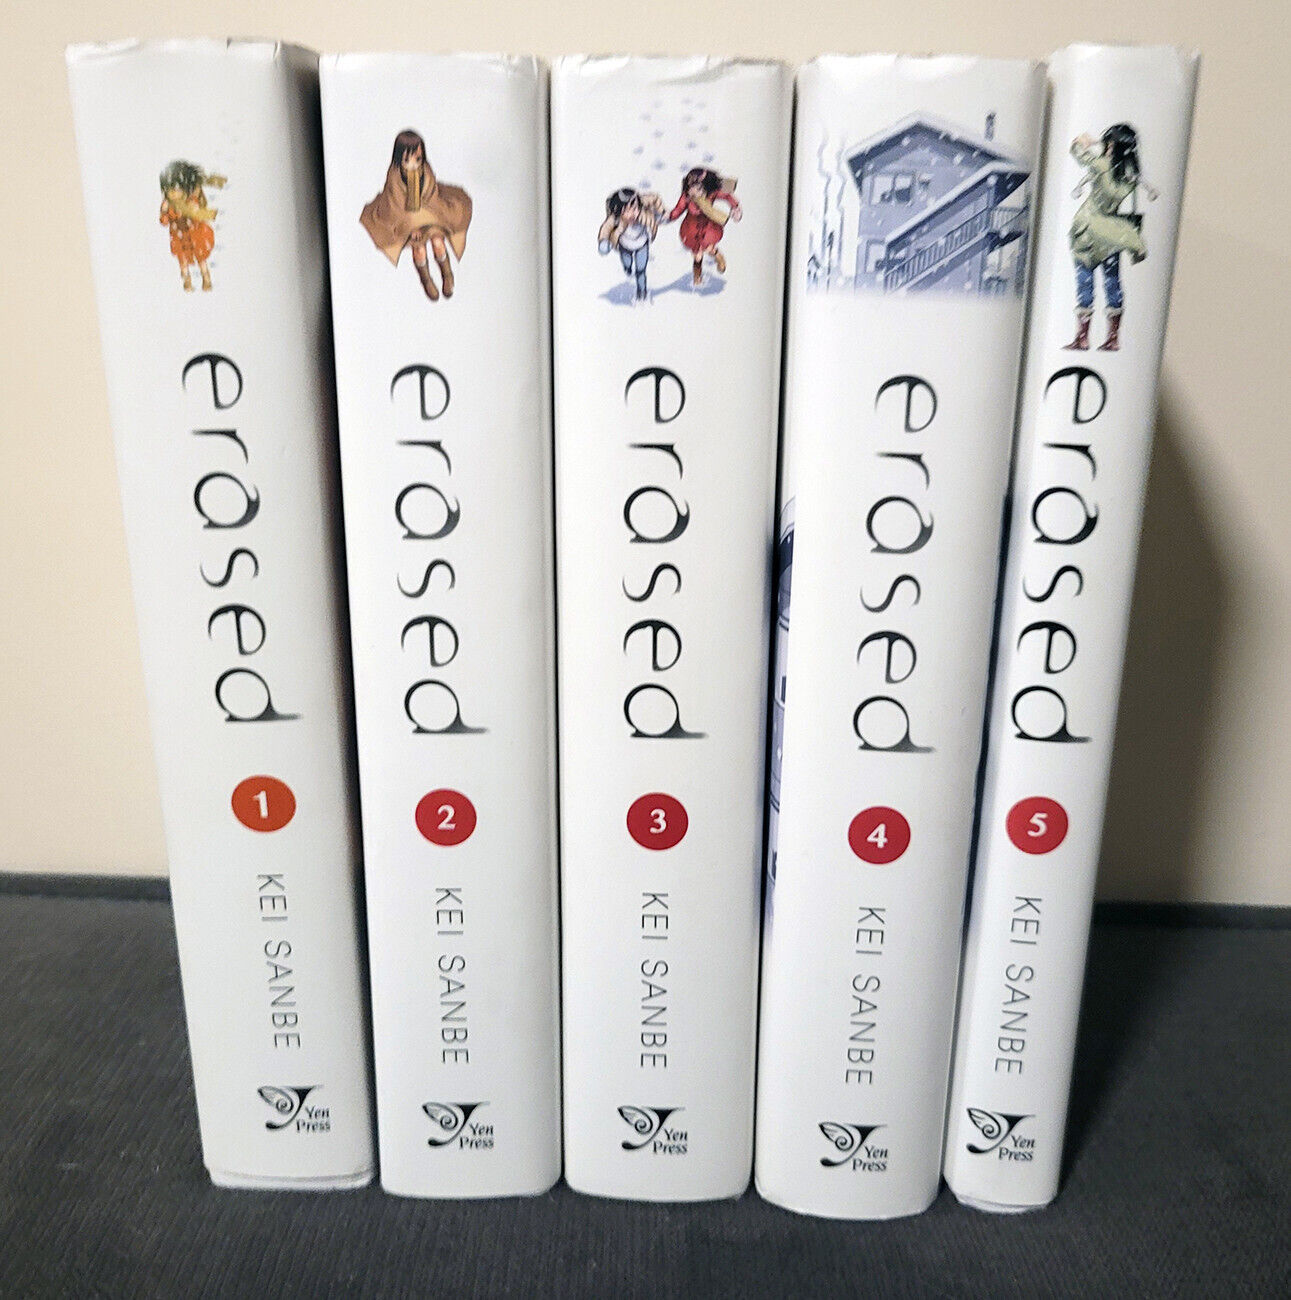 ERASED vol 1, 2, 3, 4, 5 COMPLETE SET by Kei Sanbe HARDCOVER 2017-2018